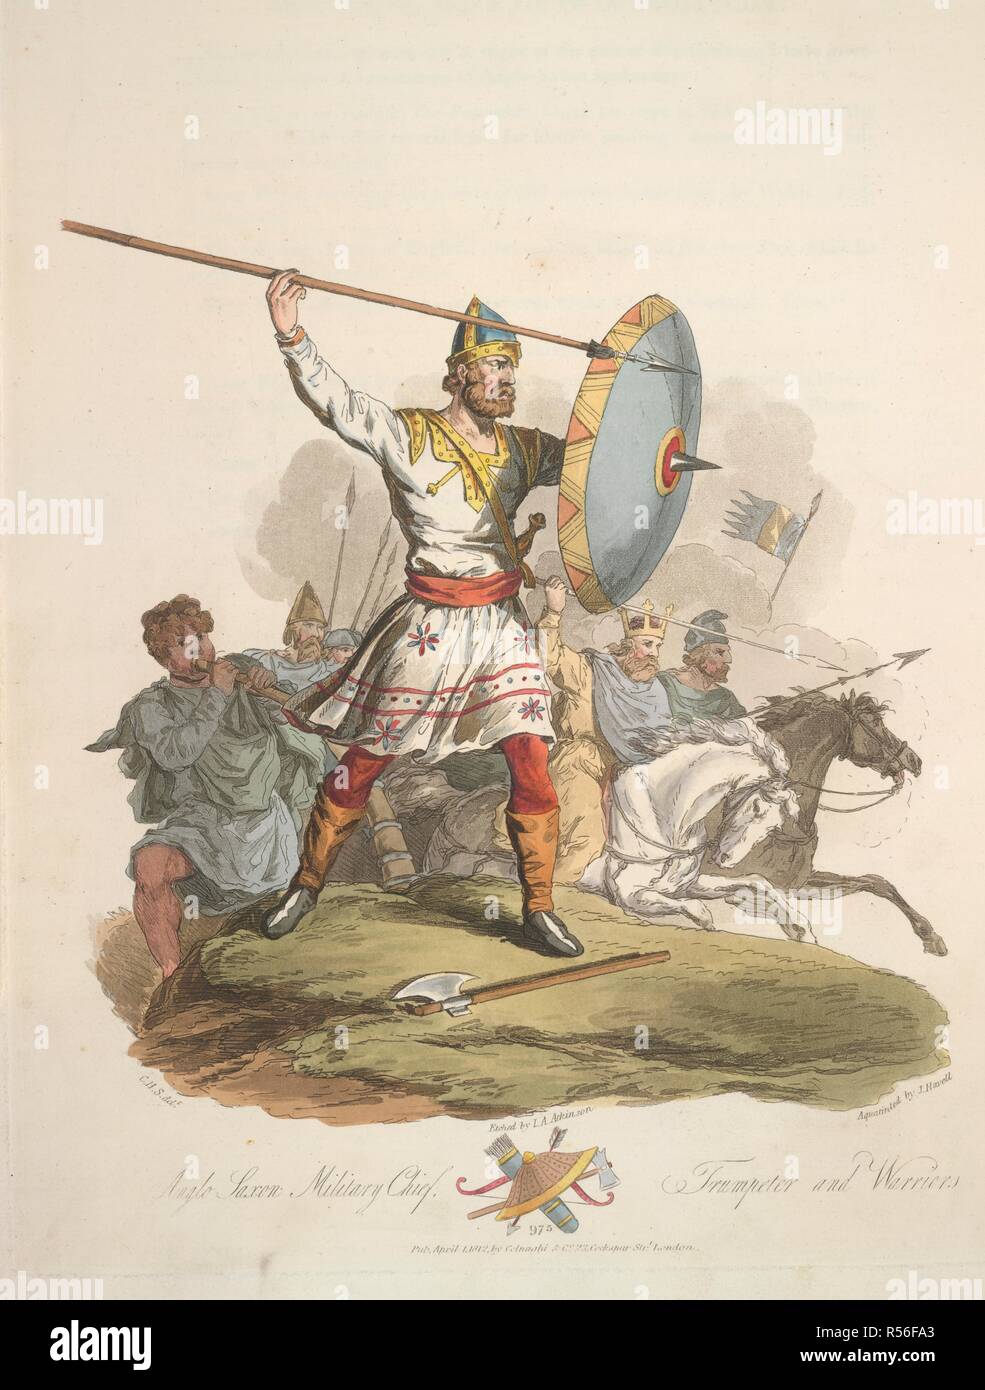 Anglo-Saxon chief. The Costume of the original inhabitants of the Bri. R. Havell: London, 1815. Anglo-Saxon military chief, trumpeter and warriors. Anno 975.  Image taken from The Costume of the original inhabitants of the British Islands from the earliest periods to the sixth century, to which is added that of theGothic nations on the Western Coasts of the Baltic, the ancestors of the Anglo-saxons and Anglo-Danes..  Originally published/produced in R. Havell: London, 1815. . Source: 141.h.13.(2),. Language: English. Stock Photo